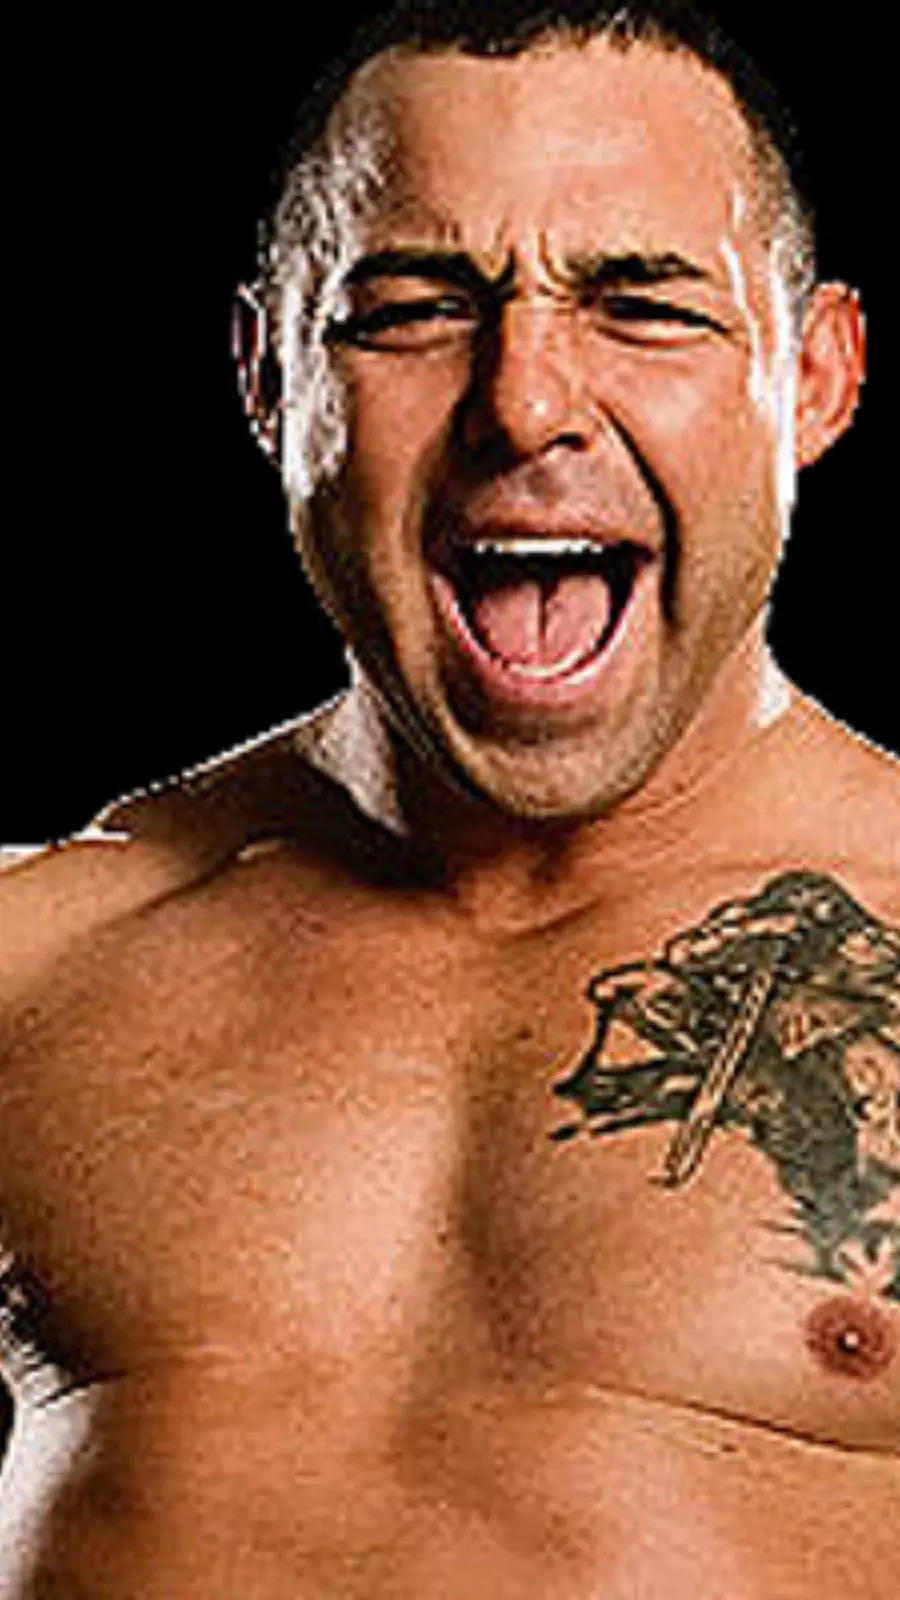 5 Things you didn't know about Santino Marella